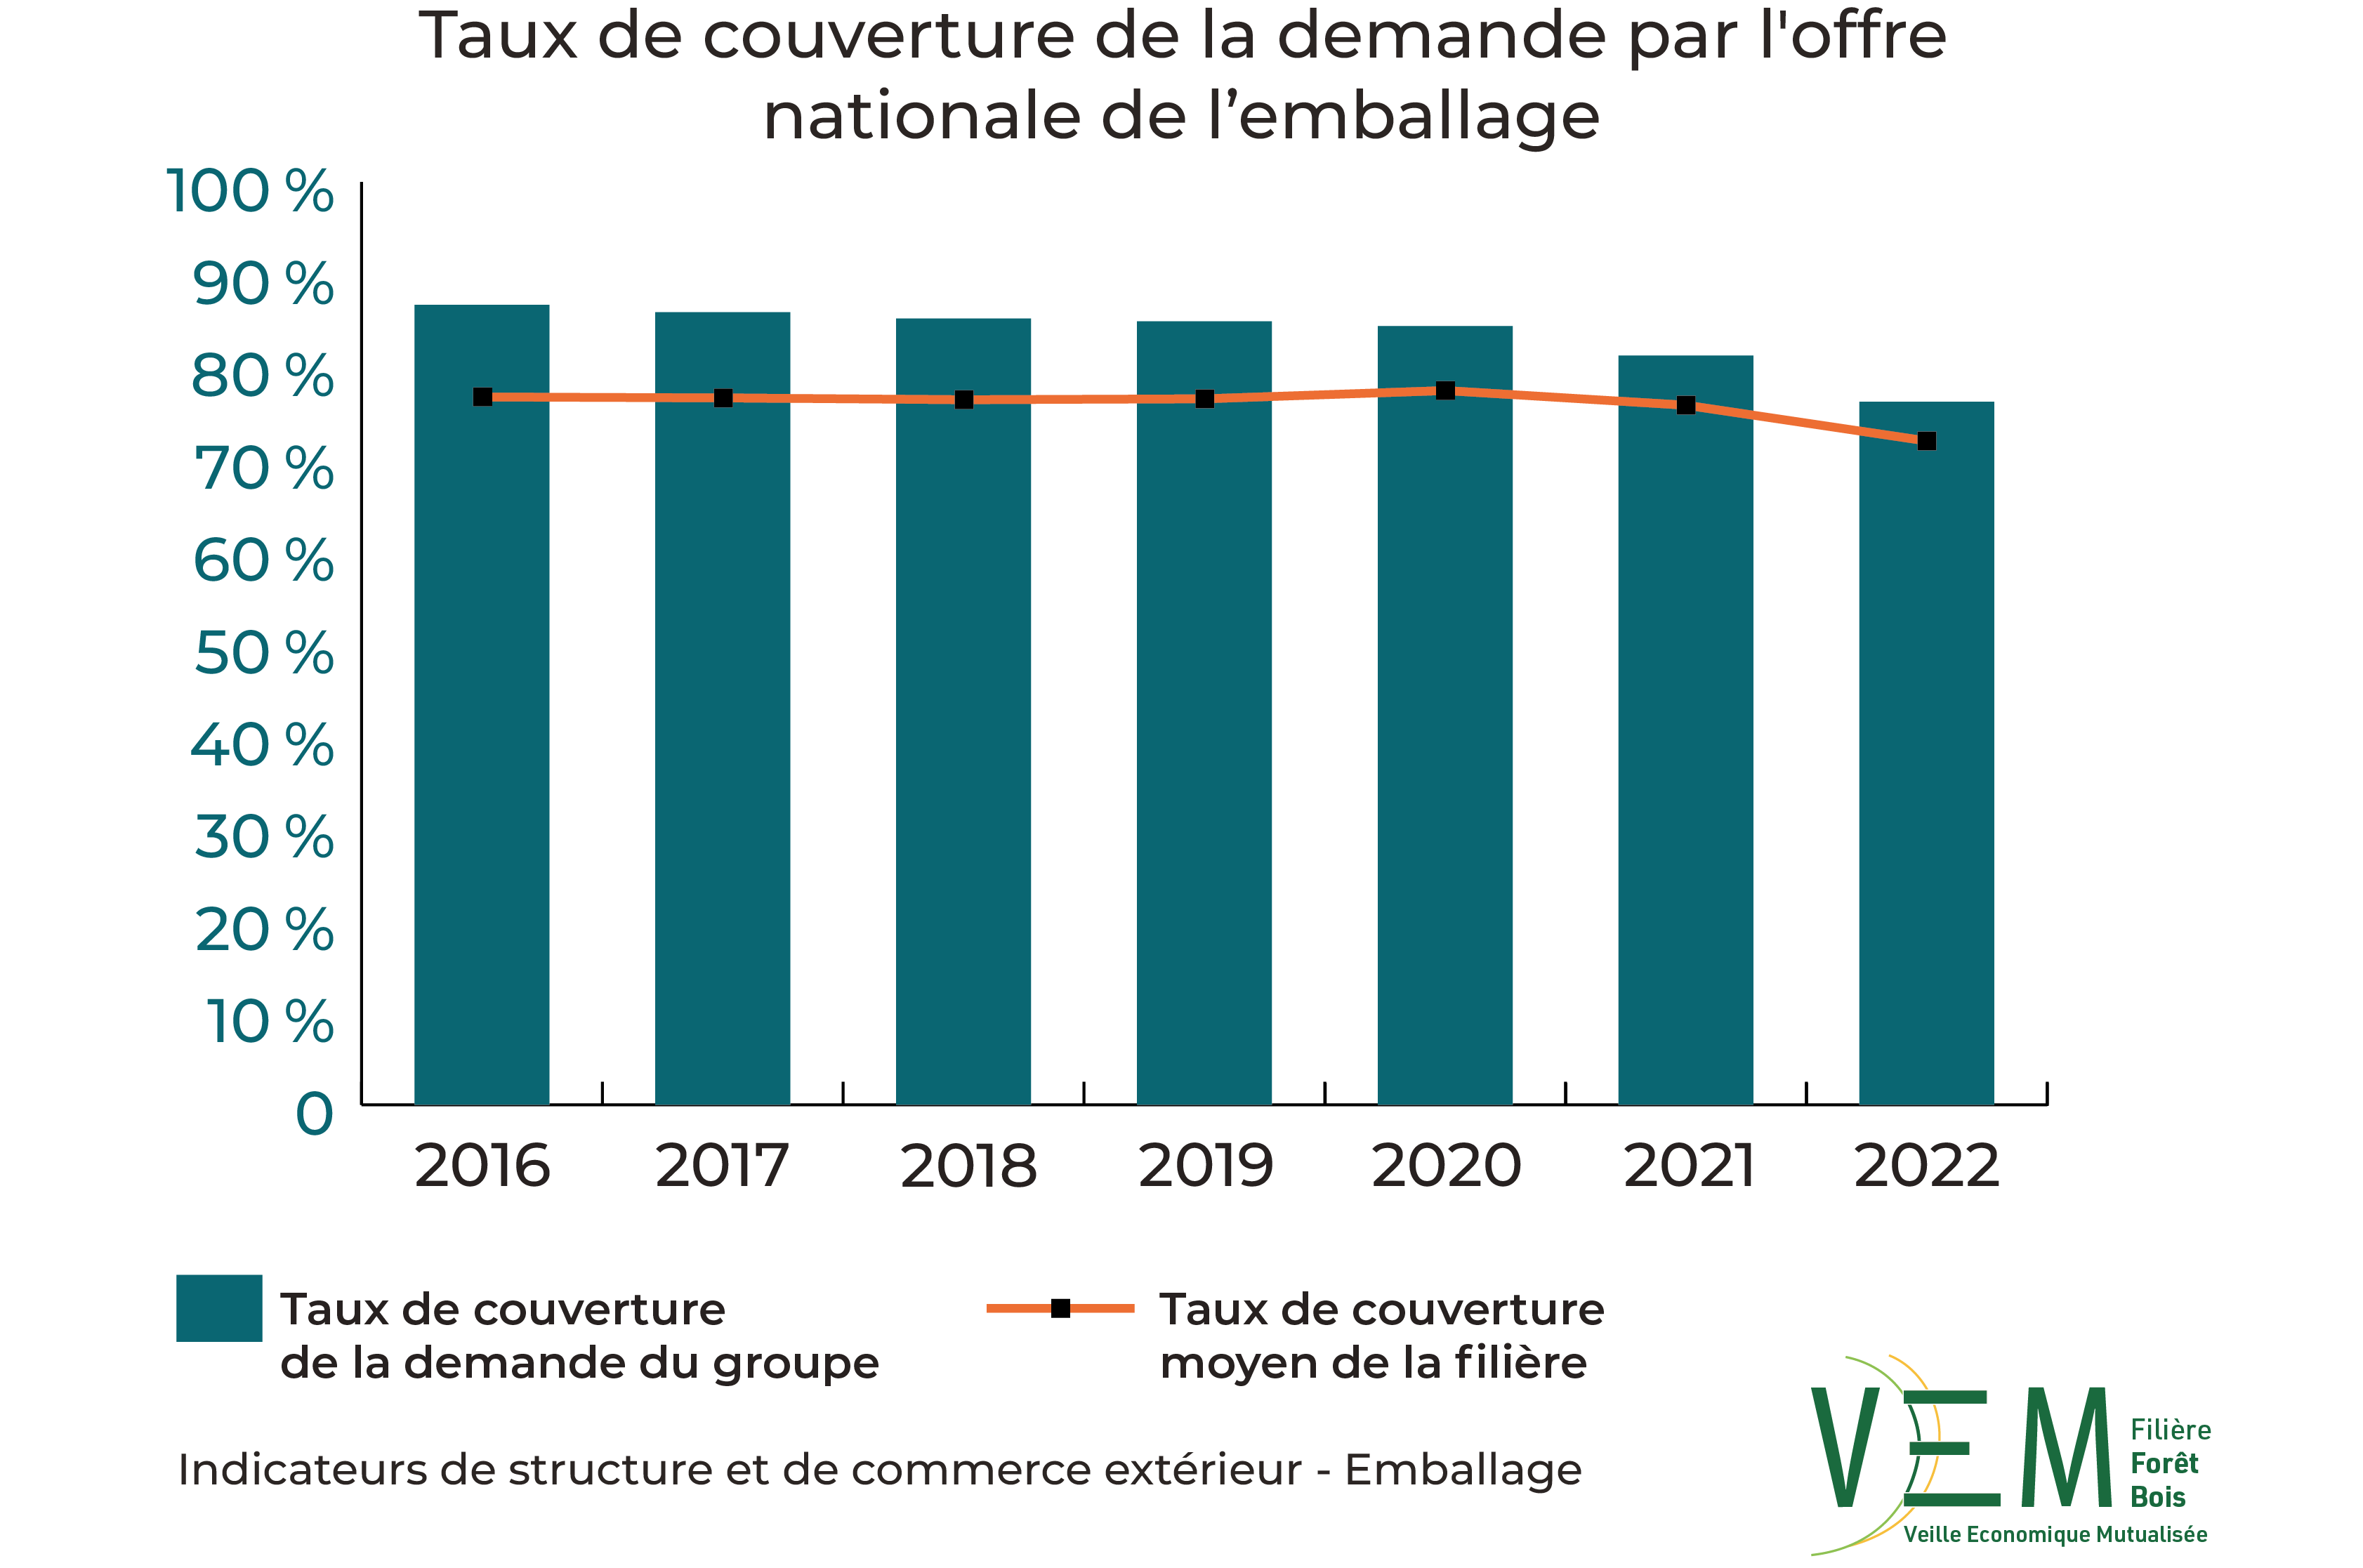 2024 ISCE TauxCouverture demande offre nationale Emballage